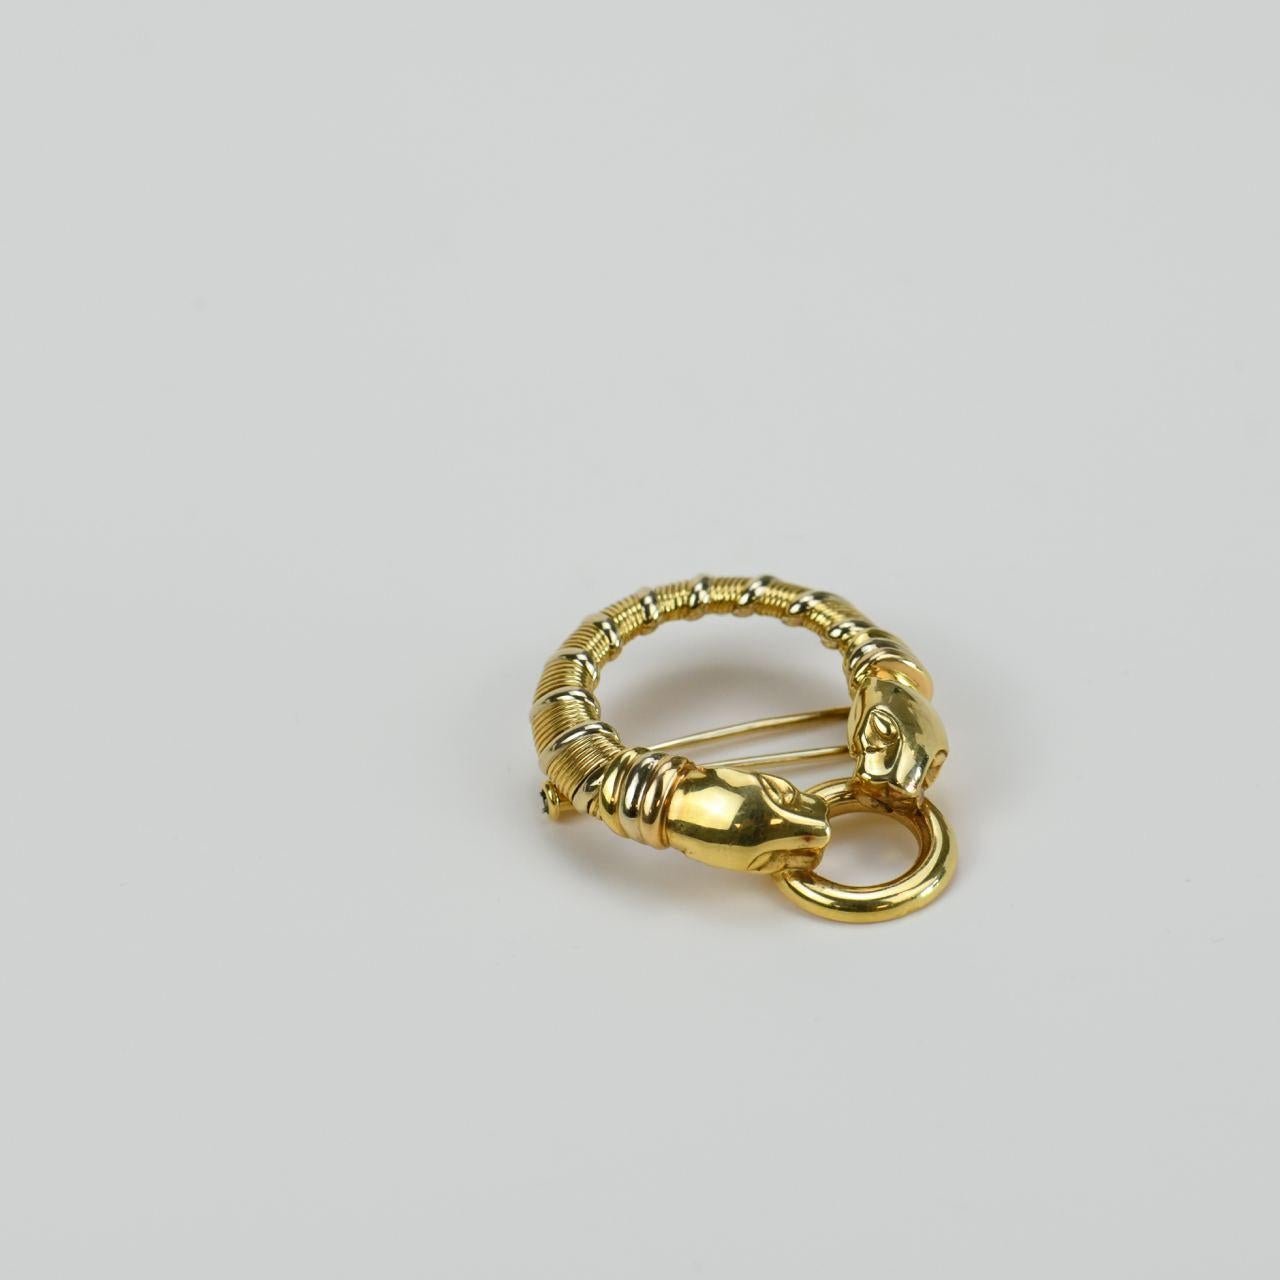 SKU CT-1652
Brand: Cartier
Model: Brooch
Serial No.: 99****
Date: Circa 1990s
______________________________________________________________
Metal: 18K Yellow Gold
Dimensions: Approx. 3×4 cm
Weight: Approx. 20